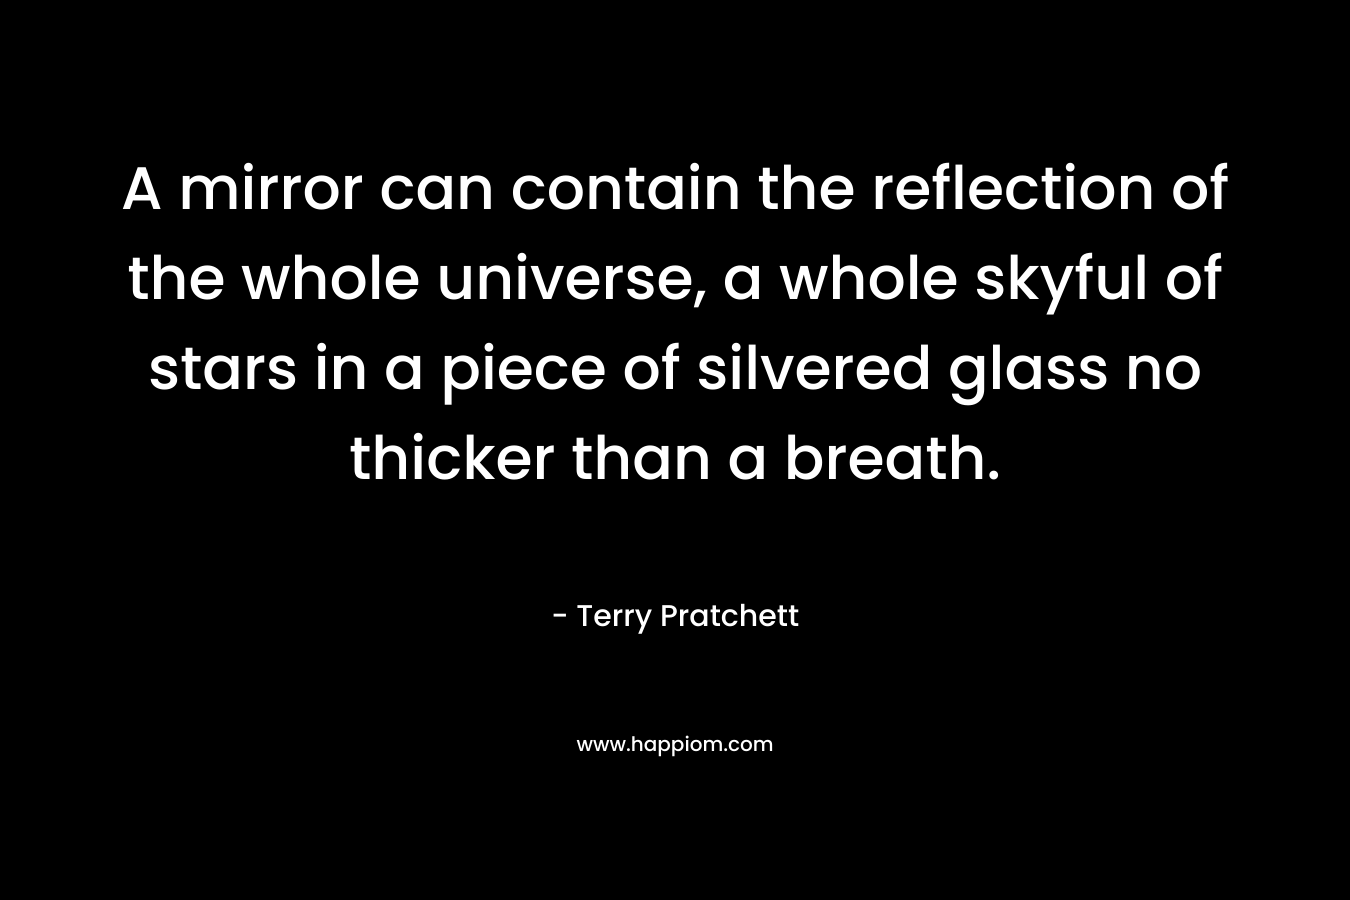 A mirror can contain the reflection of the whole universe, a whole skyful of stars in a piece of silvered glass no thicker than a breath.